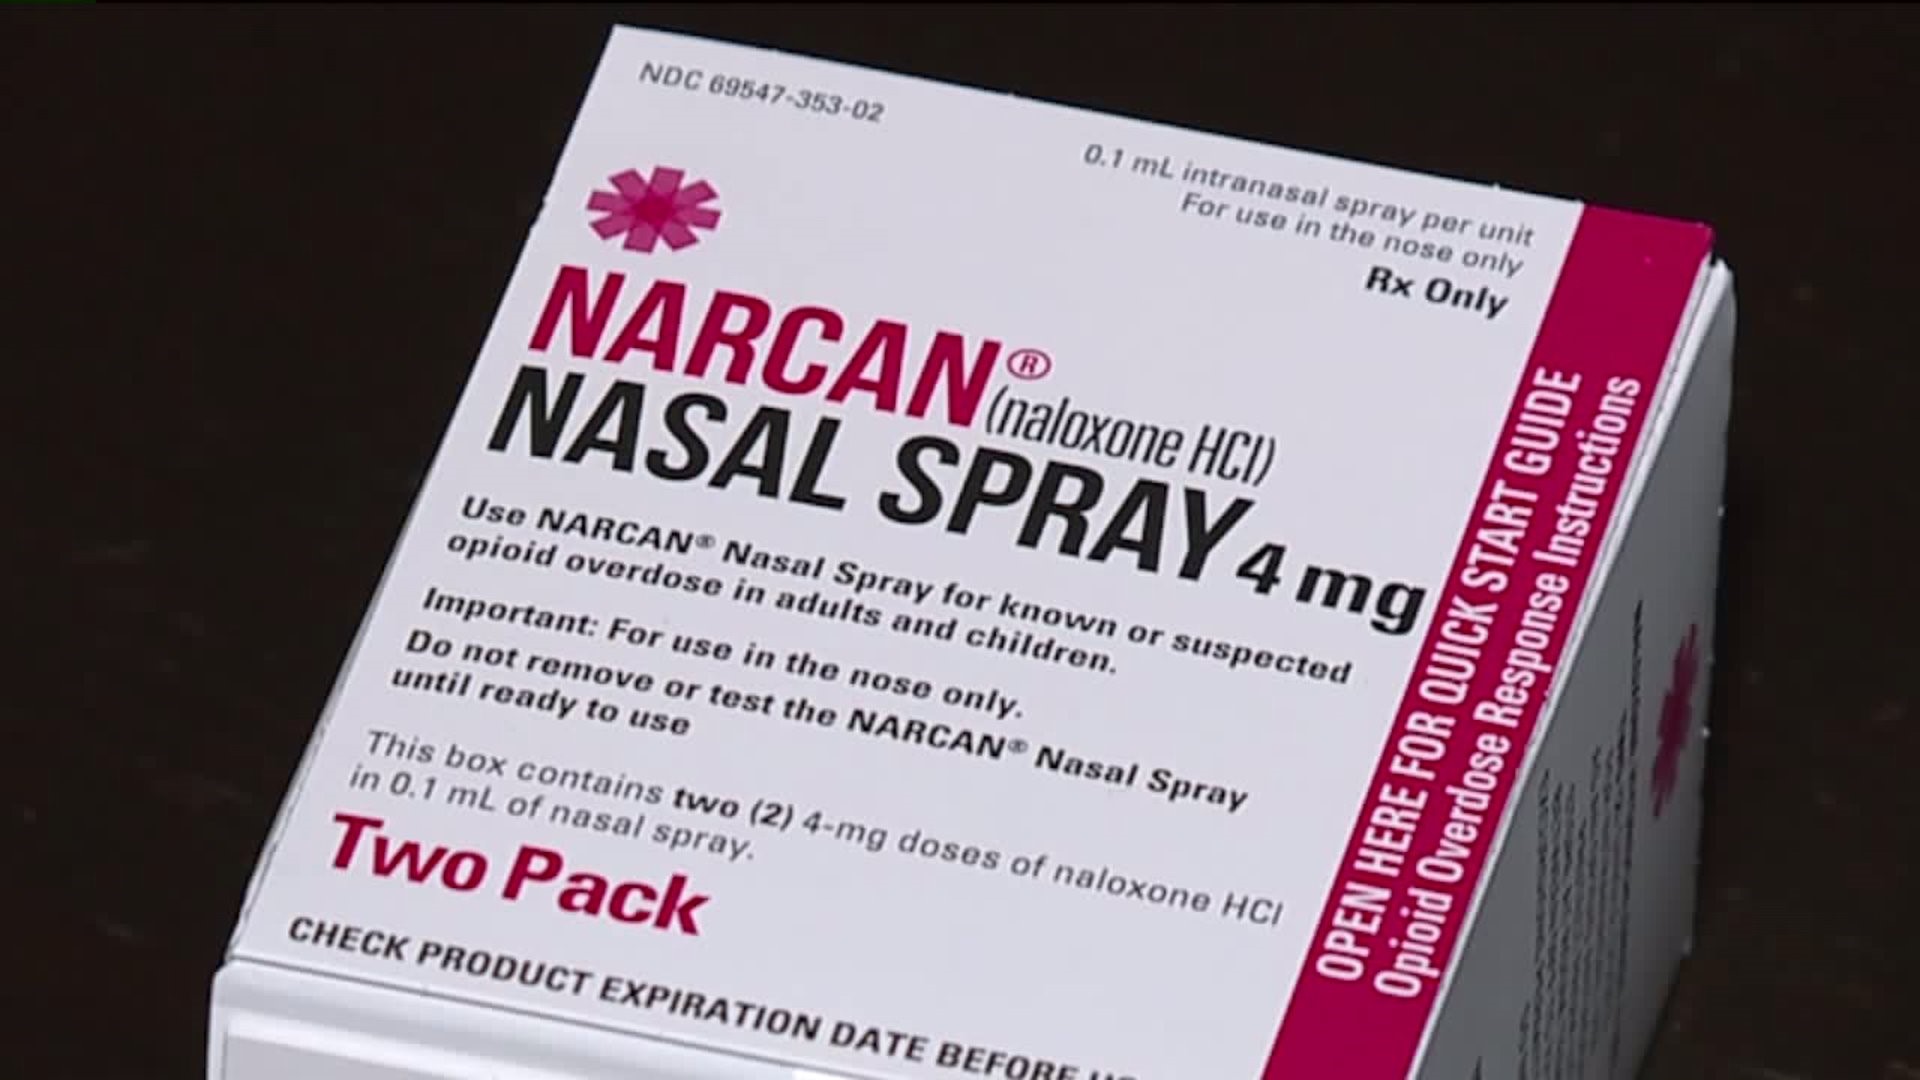 Narcan For Free In Wilkes-Barre And Across State